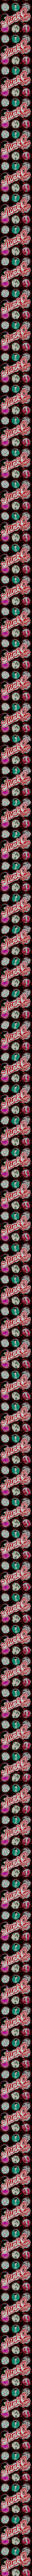 SquidTops - Digital NFT Bottle Tops - 50 to Collect - SlinkOTops by T1K1Co collection image